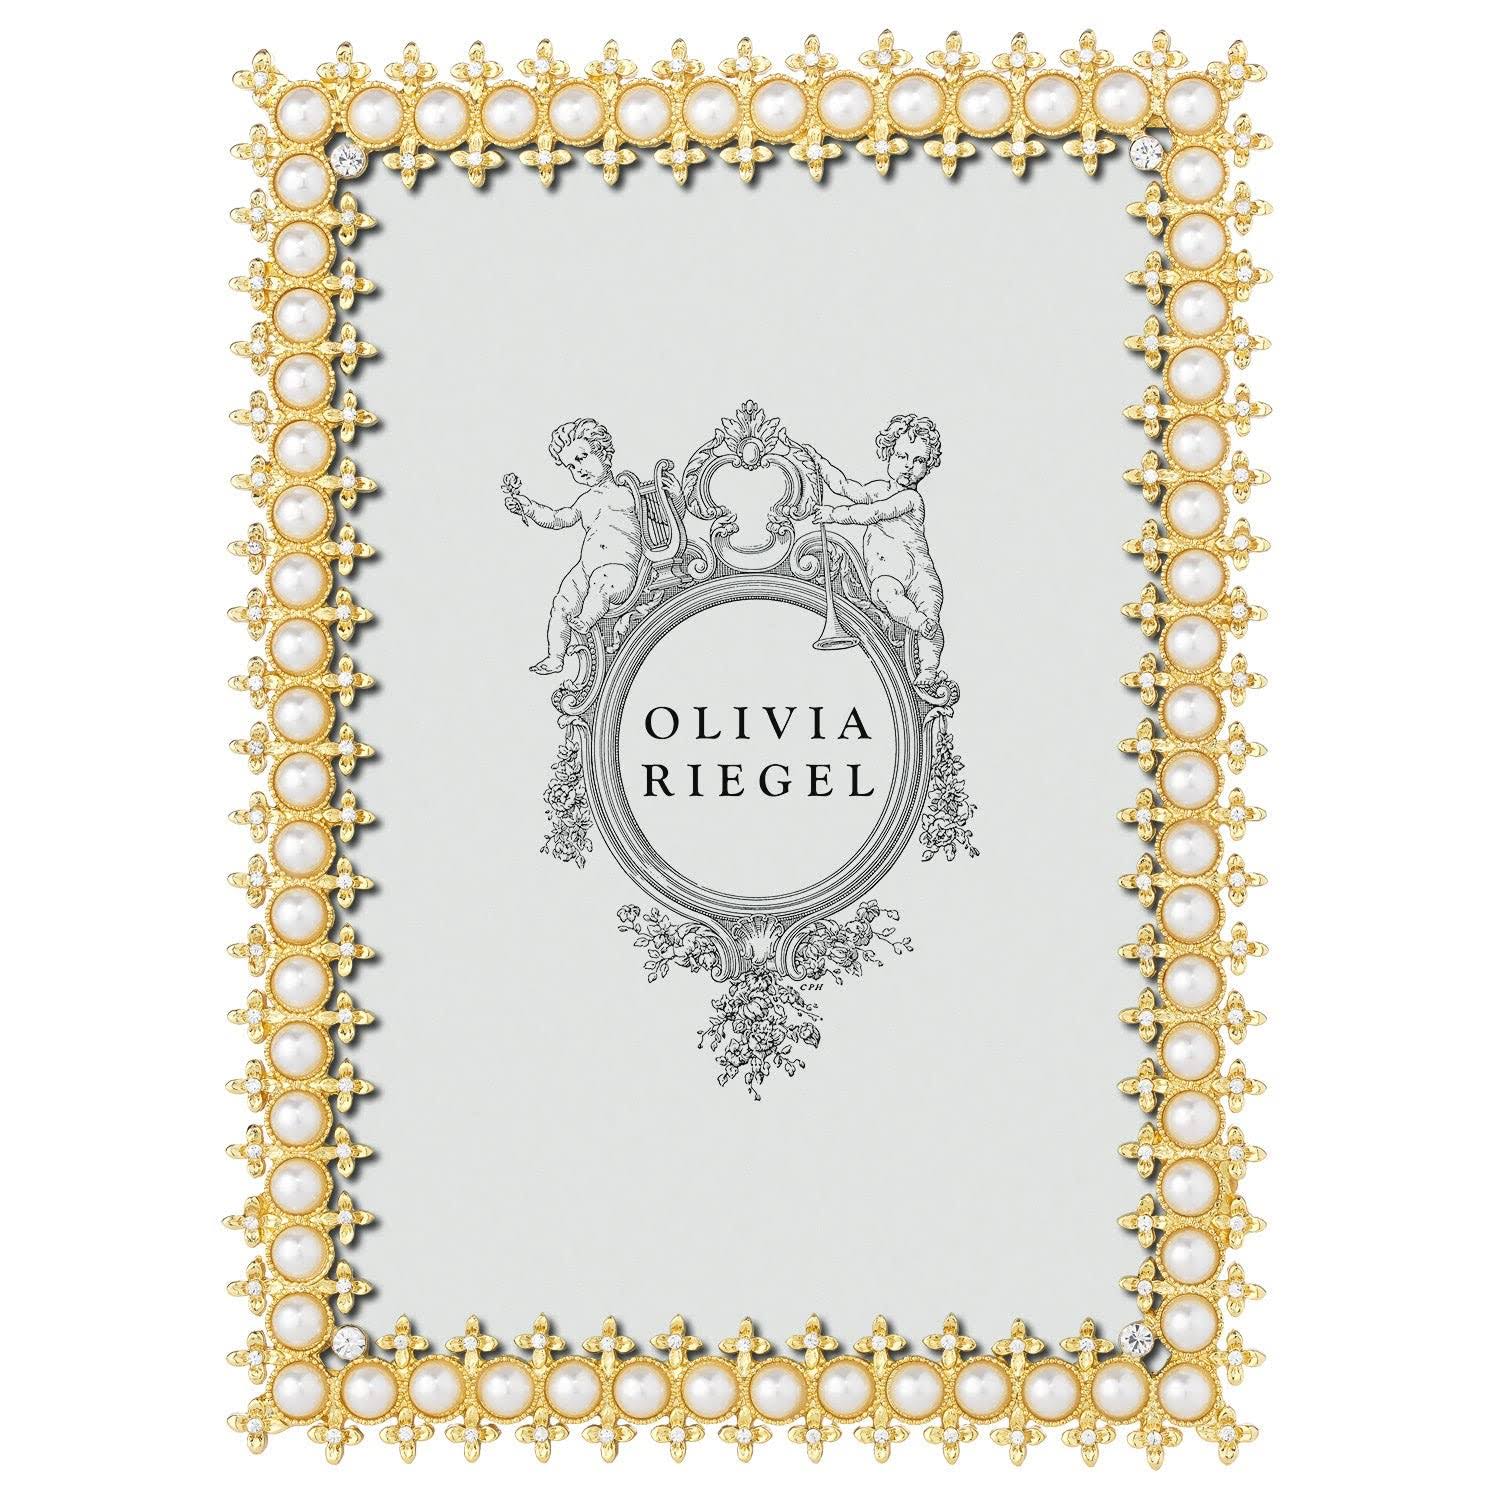 Olivia Riegel Gold Crystal and Pearl Frame - 5" x 7"